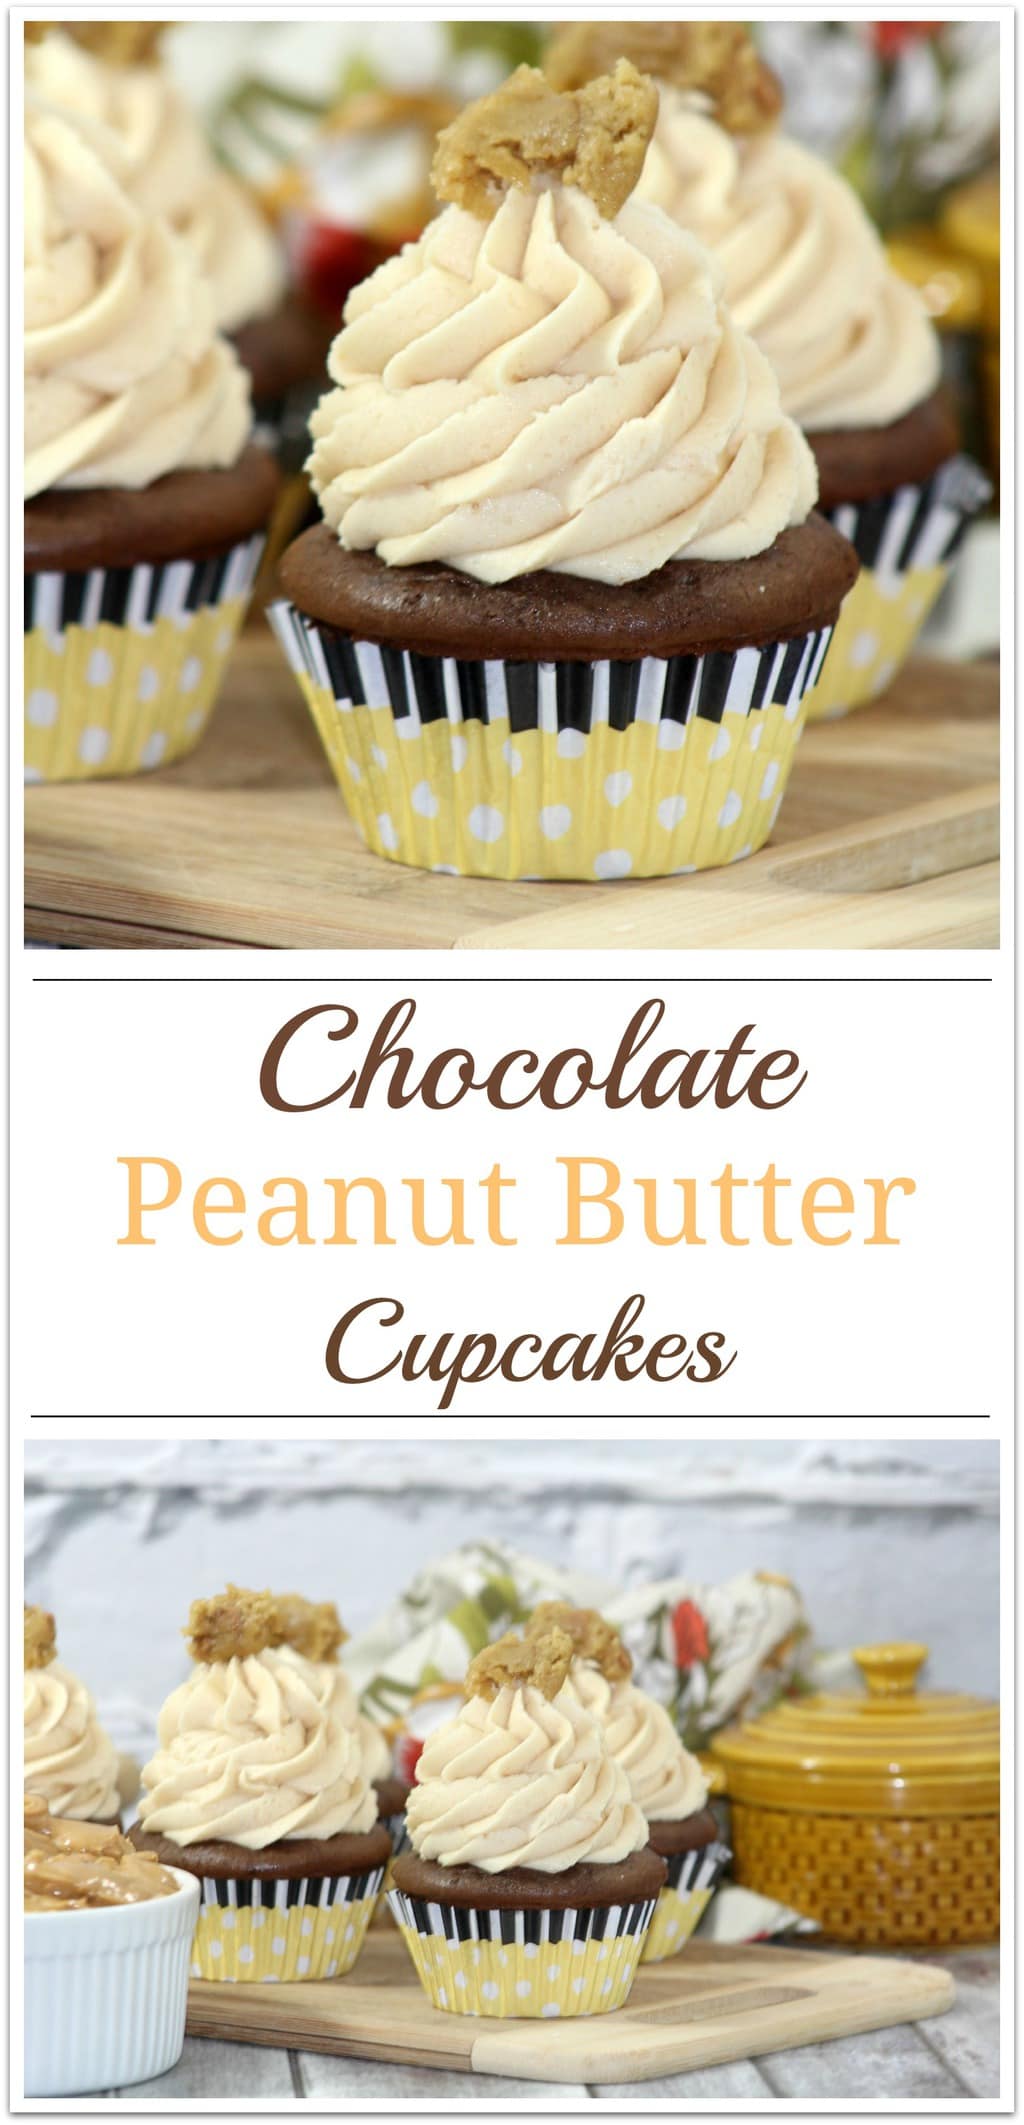 Chocolate peanut butter cupcakes with peanut butter frosting and pinch of peanut butter on top Pinterest image.